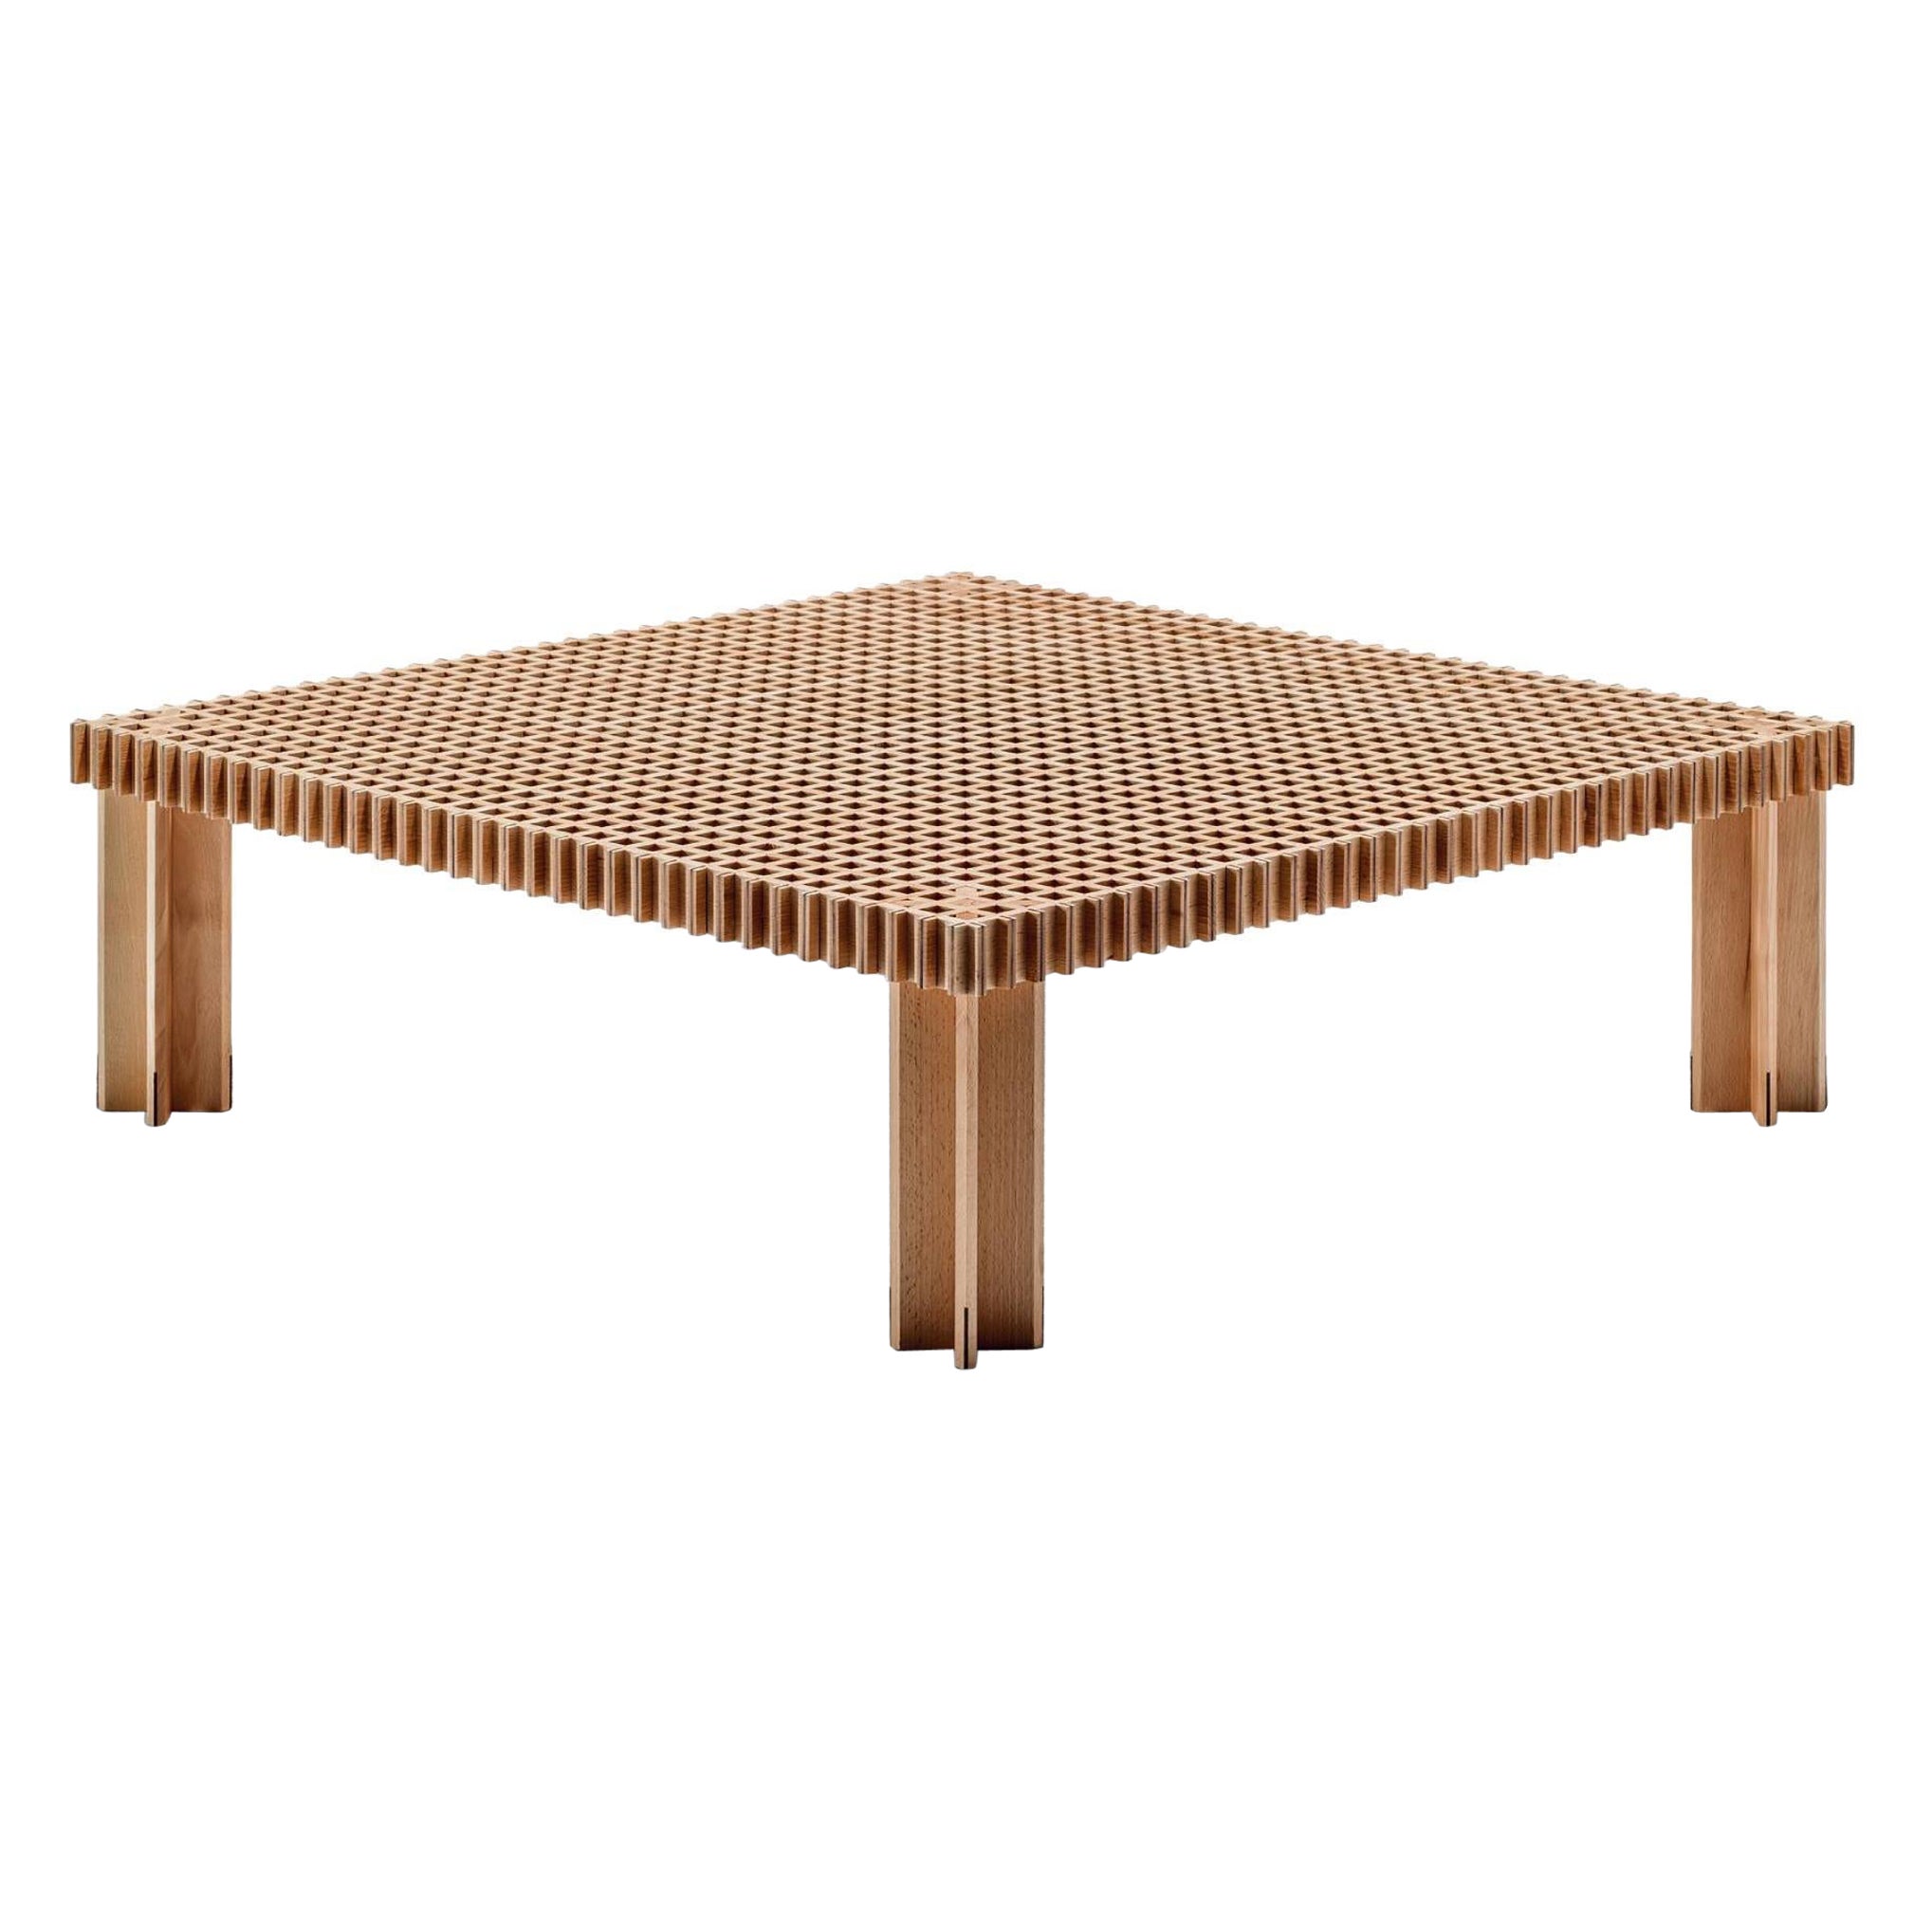 Kyoto Solid Wood Square Coffee Table Natural Beech Finish